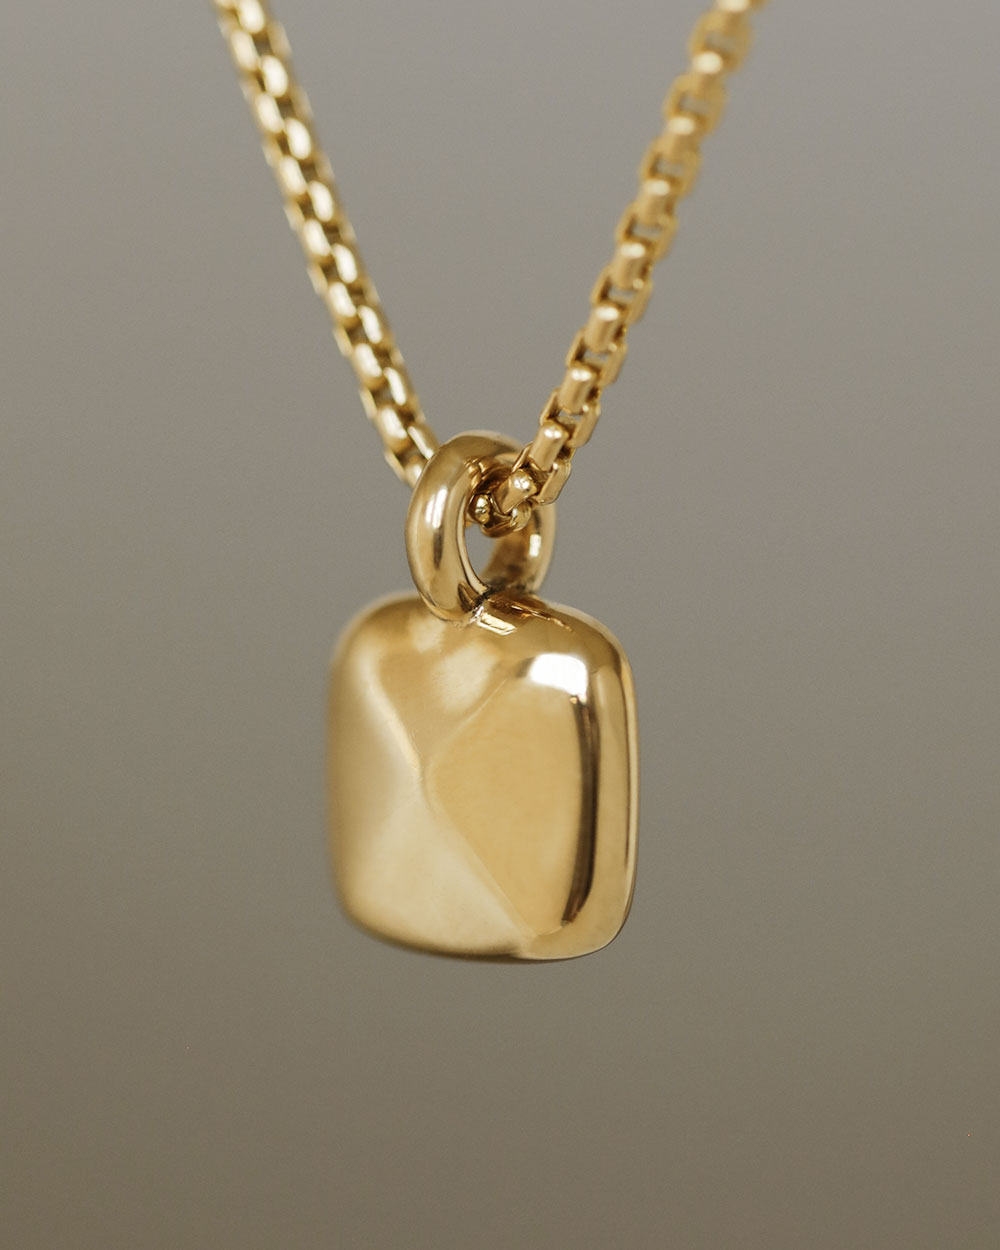 Pillow Pendant by George Rings - 12mm Square 18K Yellow Gold Pillow Pendant and 18 Box Chain